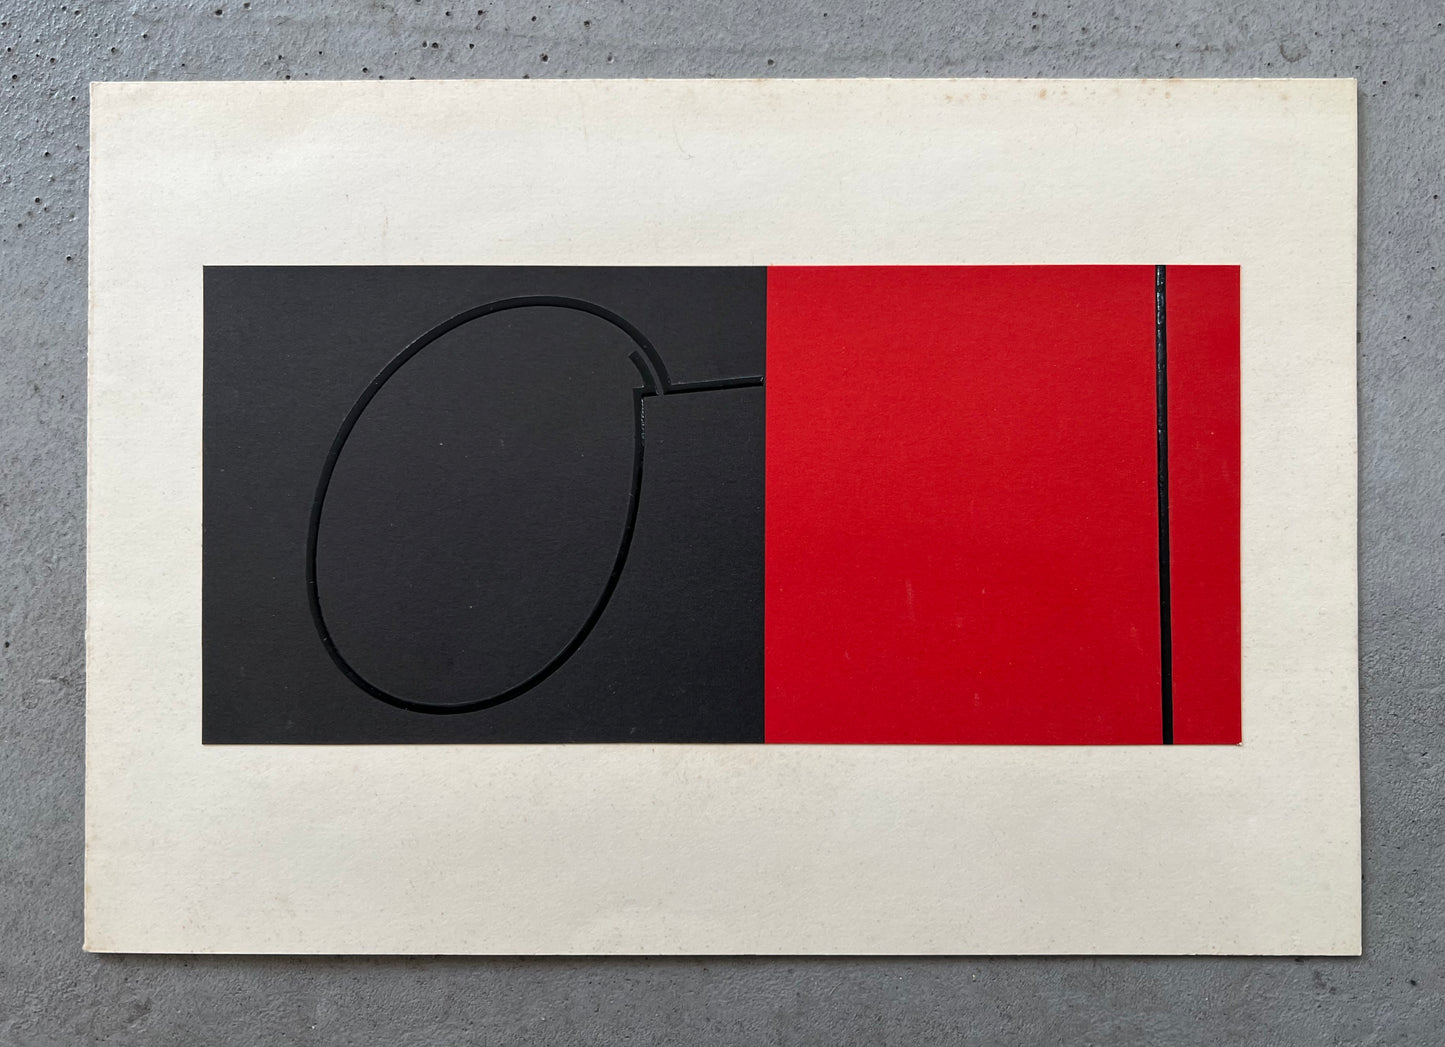 Ole Schwalbe. Composition, approx. 1960